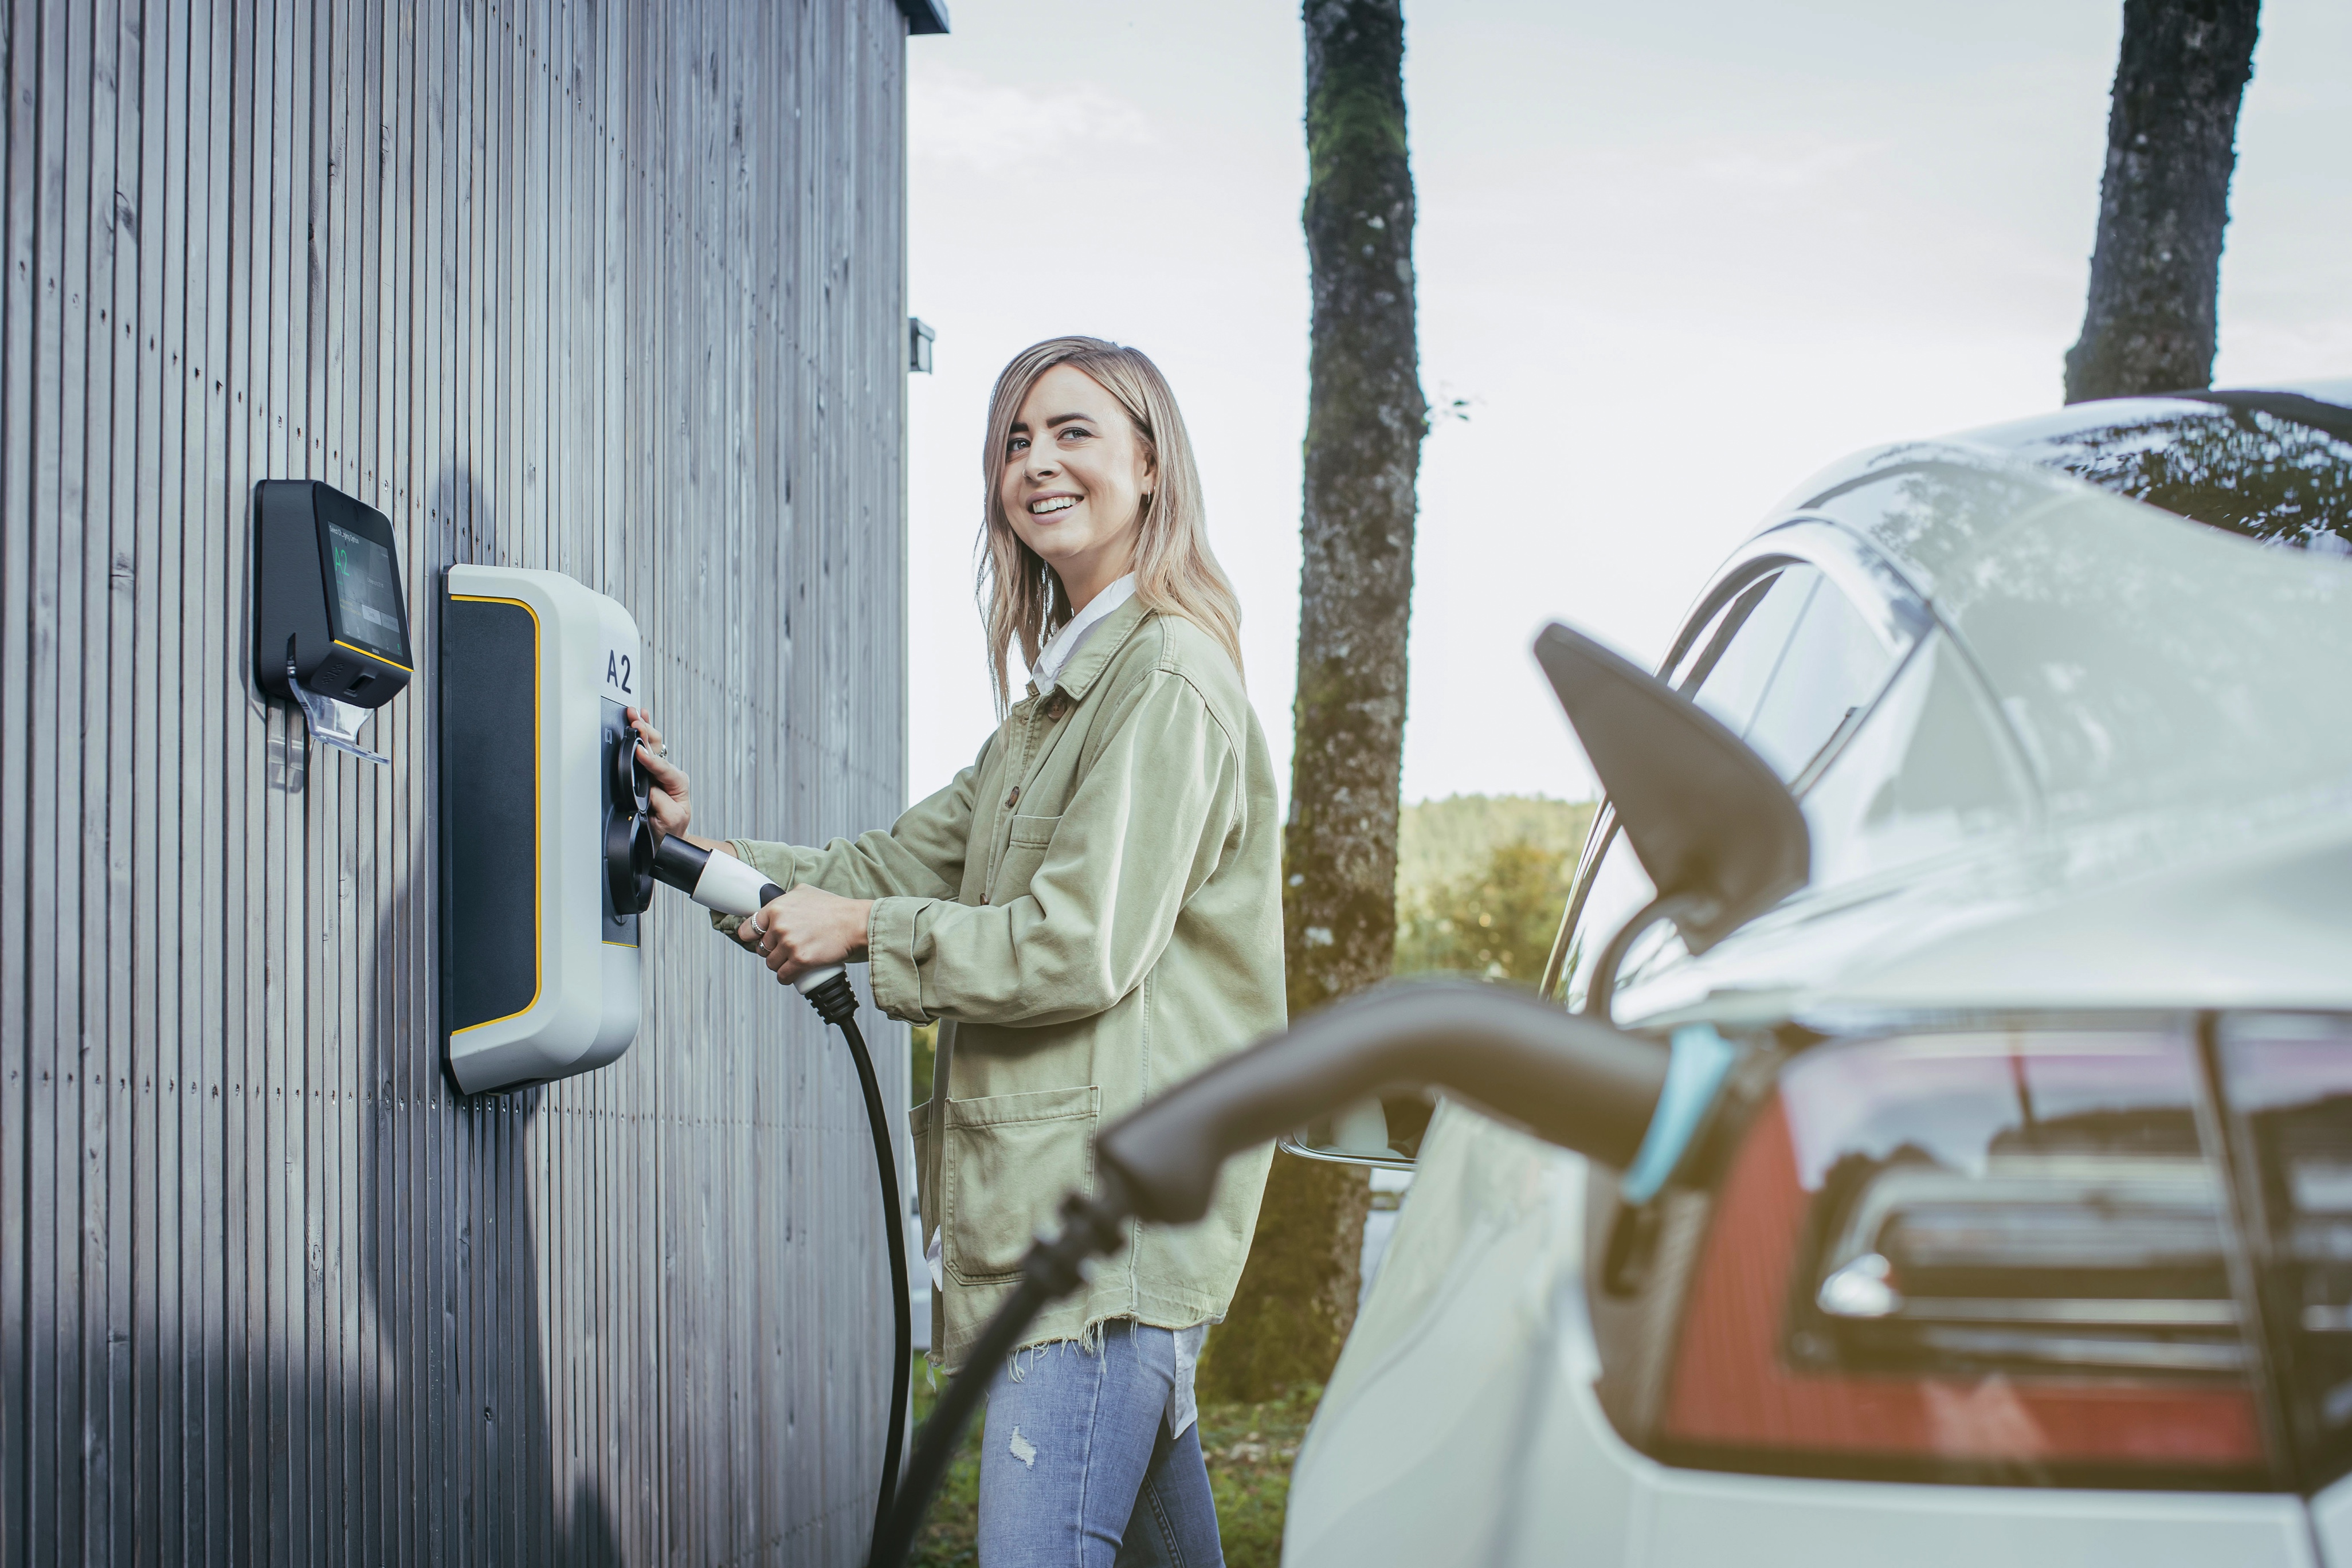 A female is standing at outdoor charging station and holding charging device to power up electric vehicle